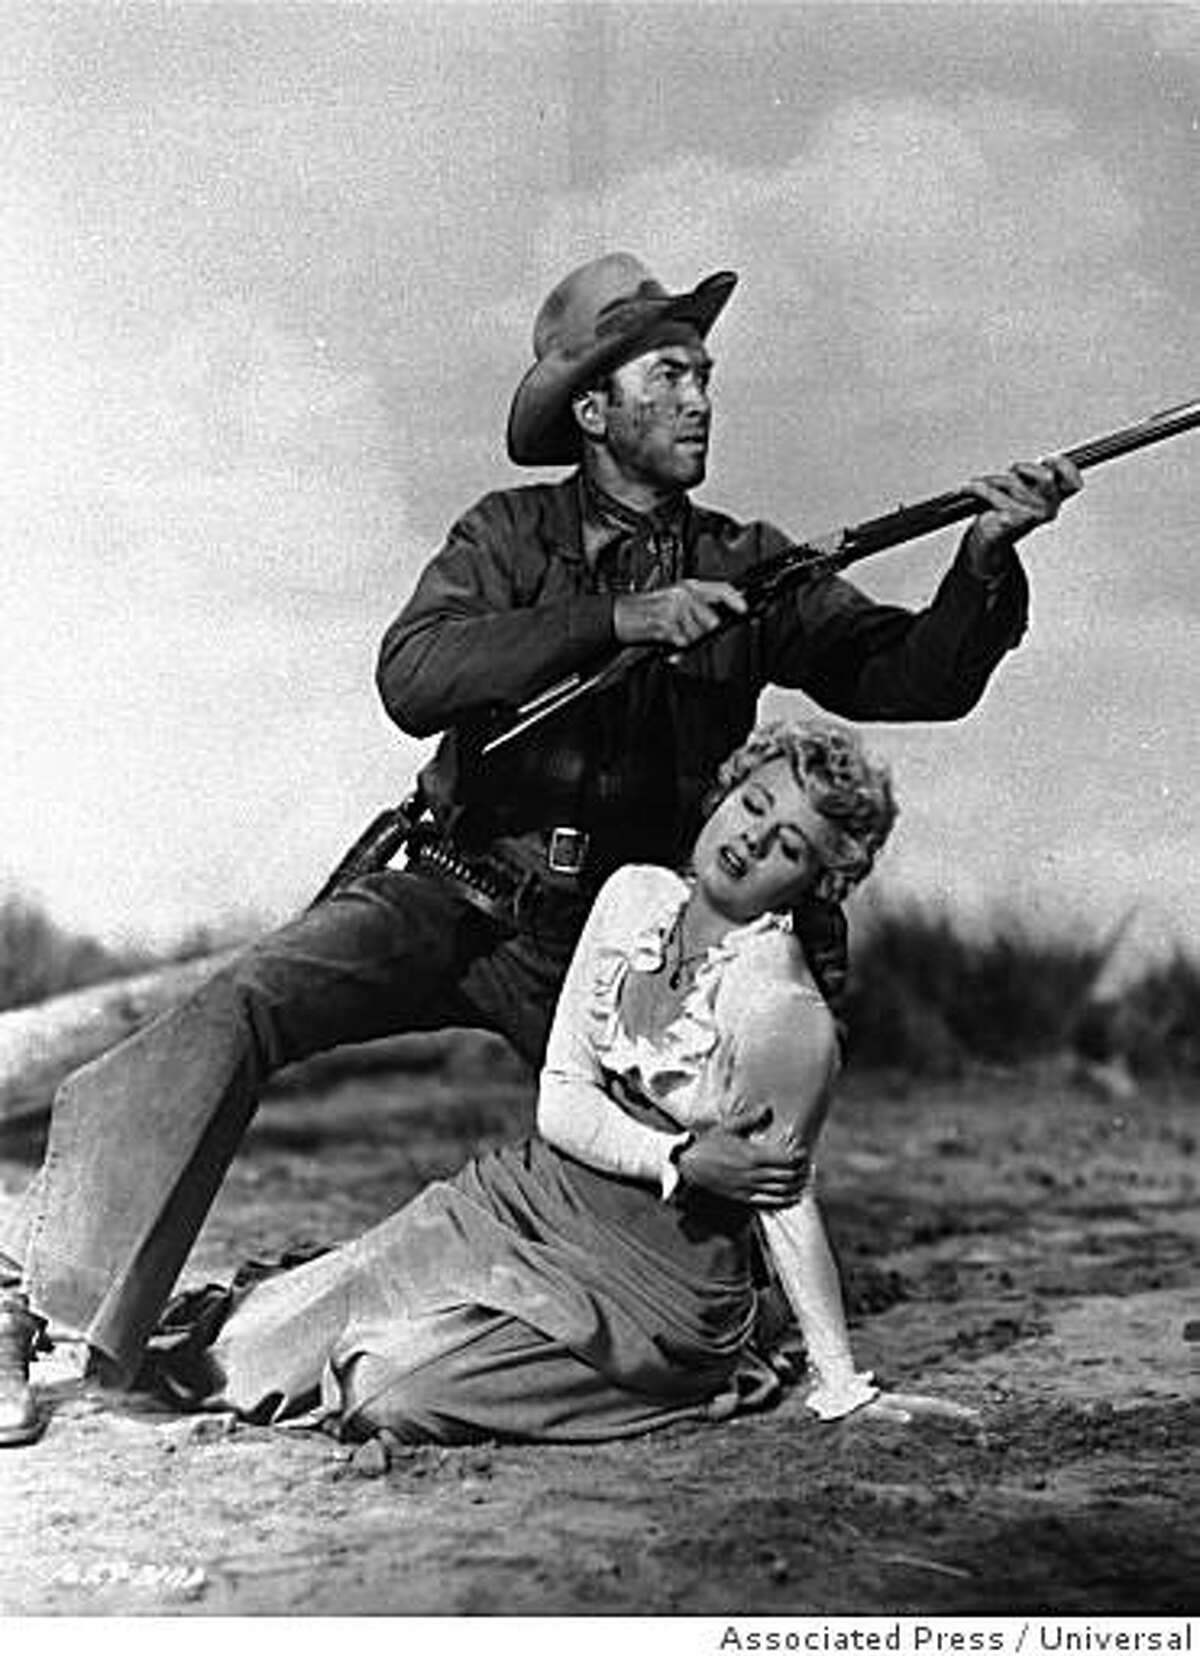 Jimmy Stewart raises his rifle in defense of Shelley Winters in a scene from the 1950 film "Winchester '73".